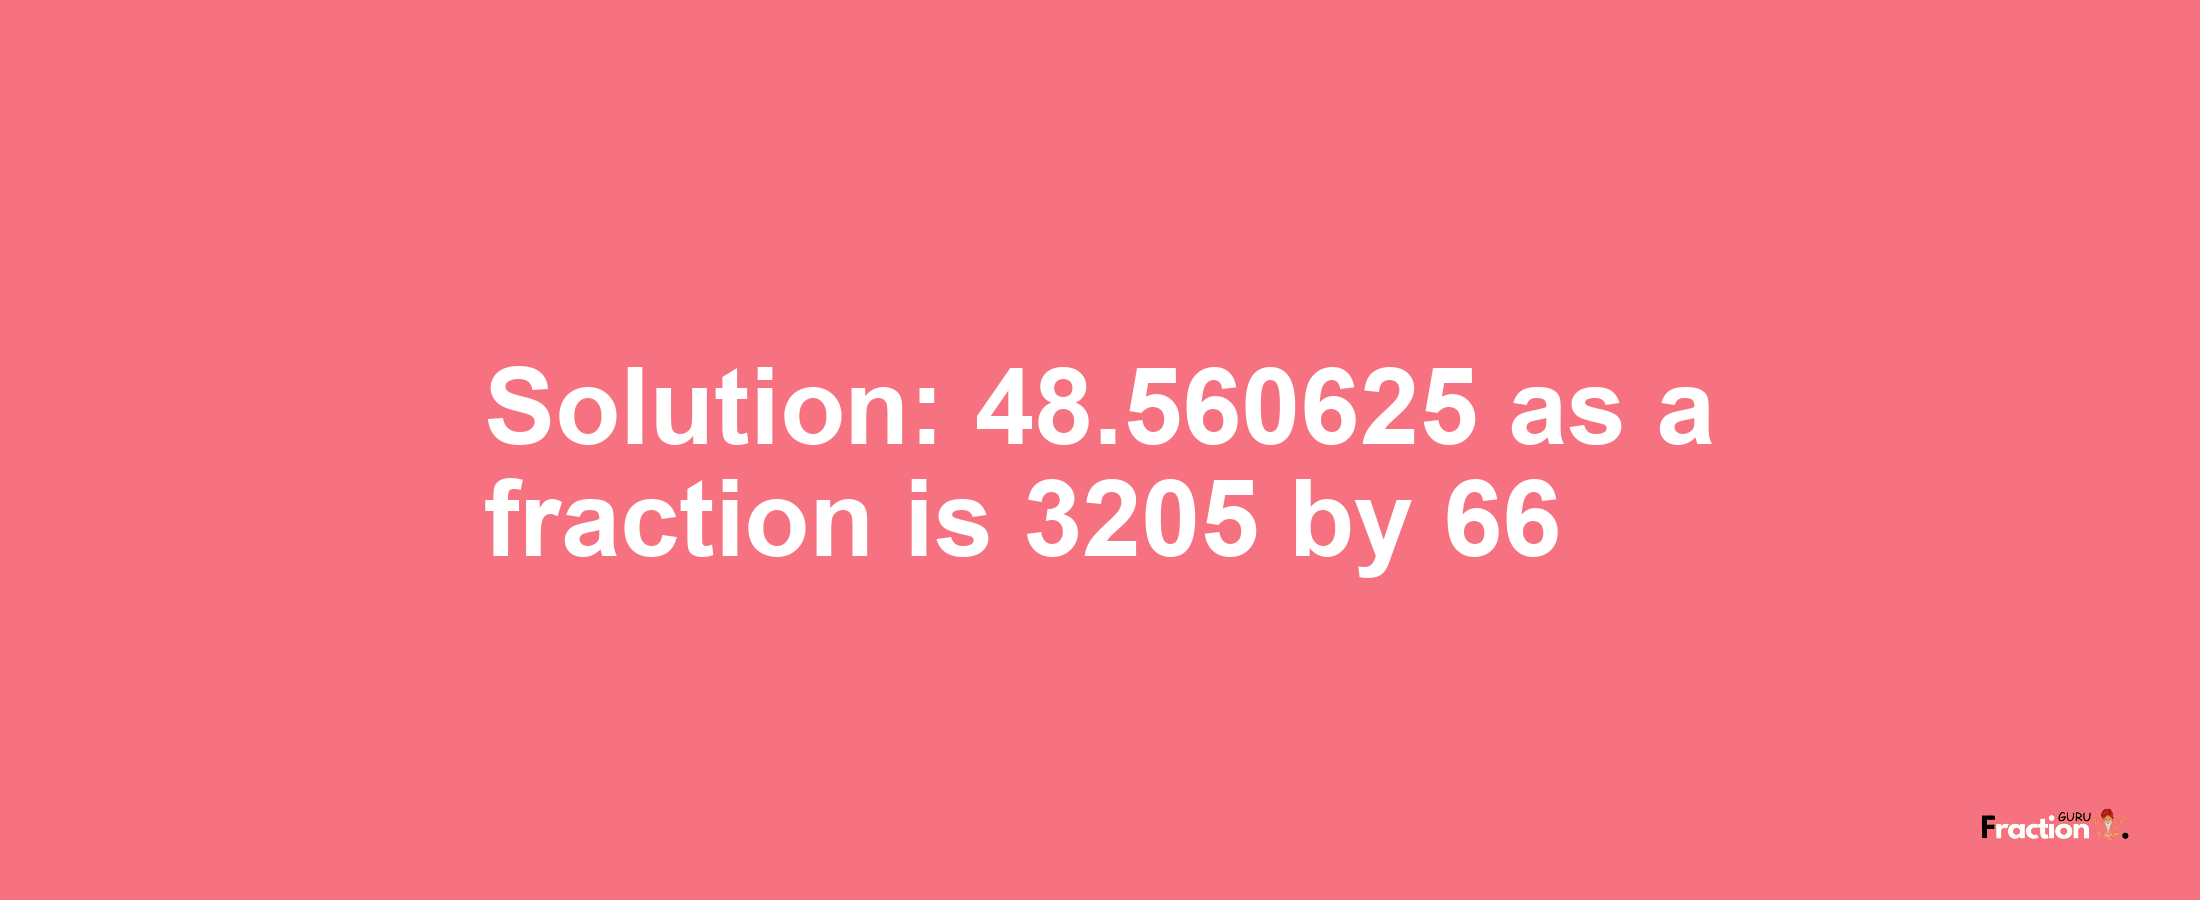 Solution:48.560625 as a fraction is 3205/66